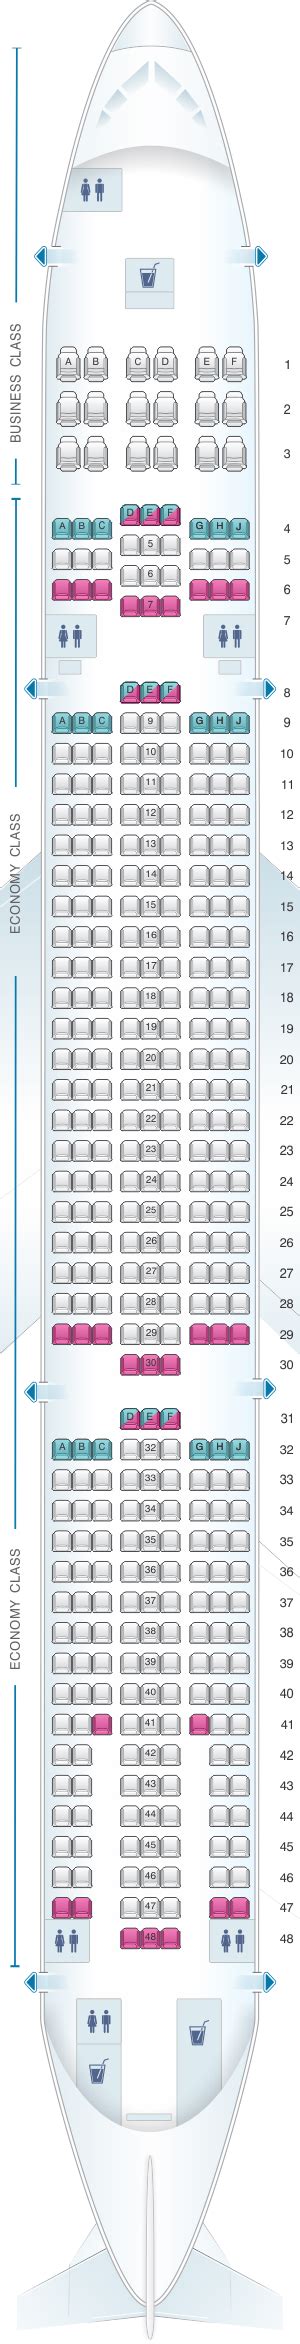 Seat Map Hi Fly Airbus A330 900 Seatmaestro